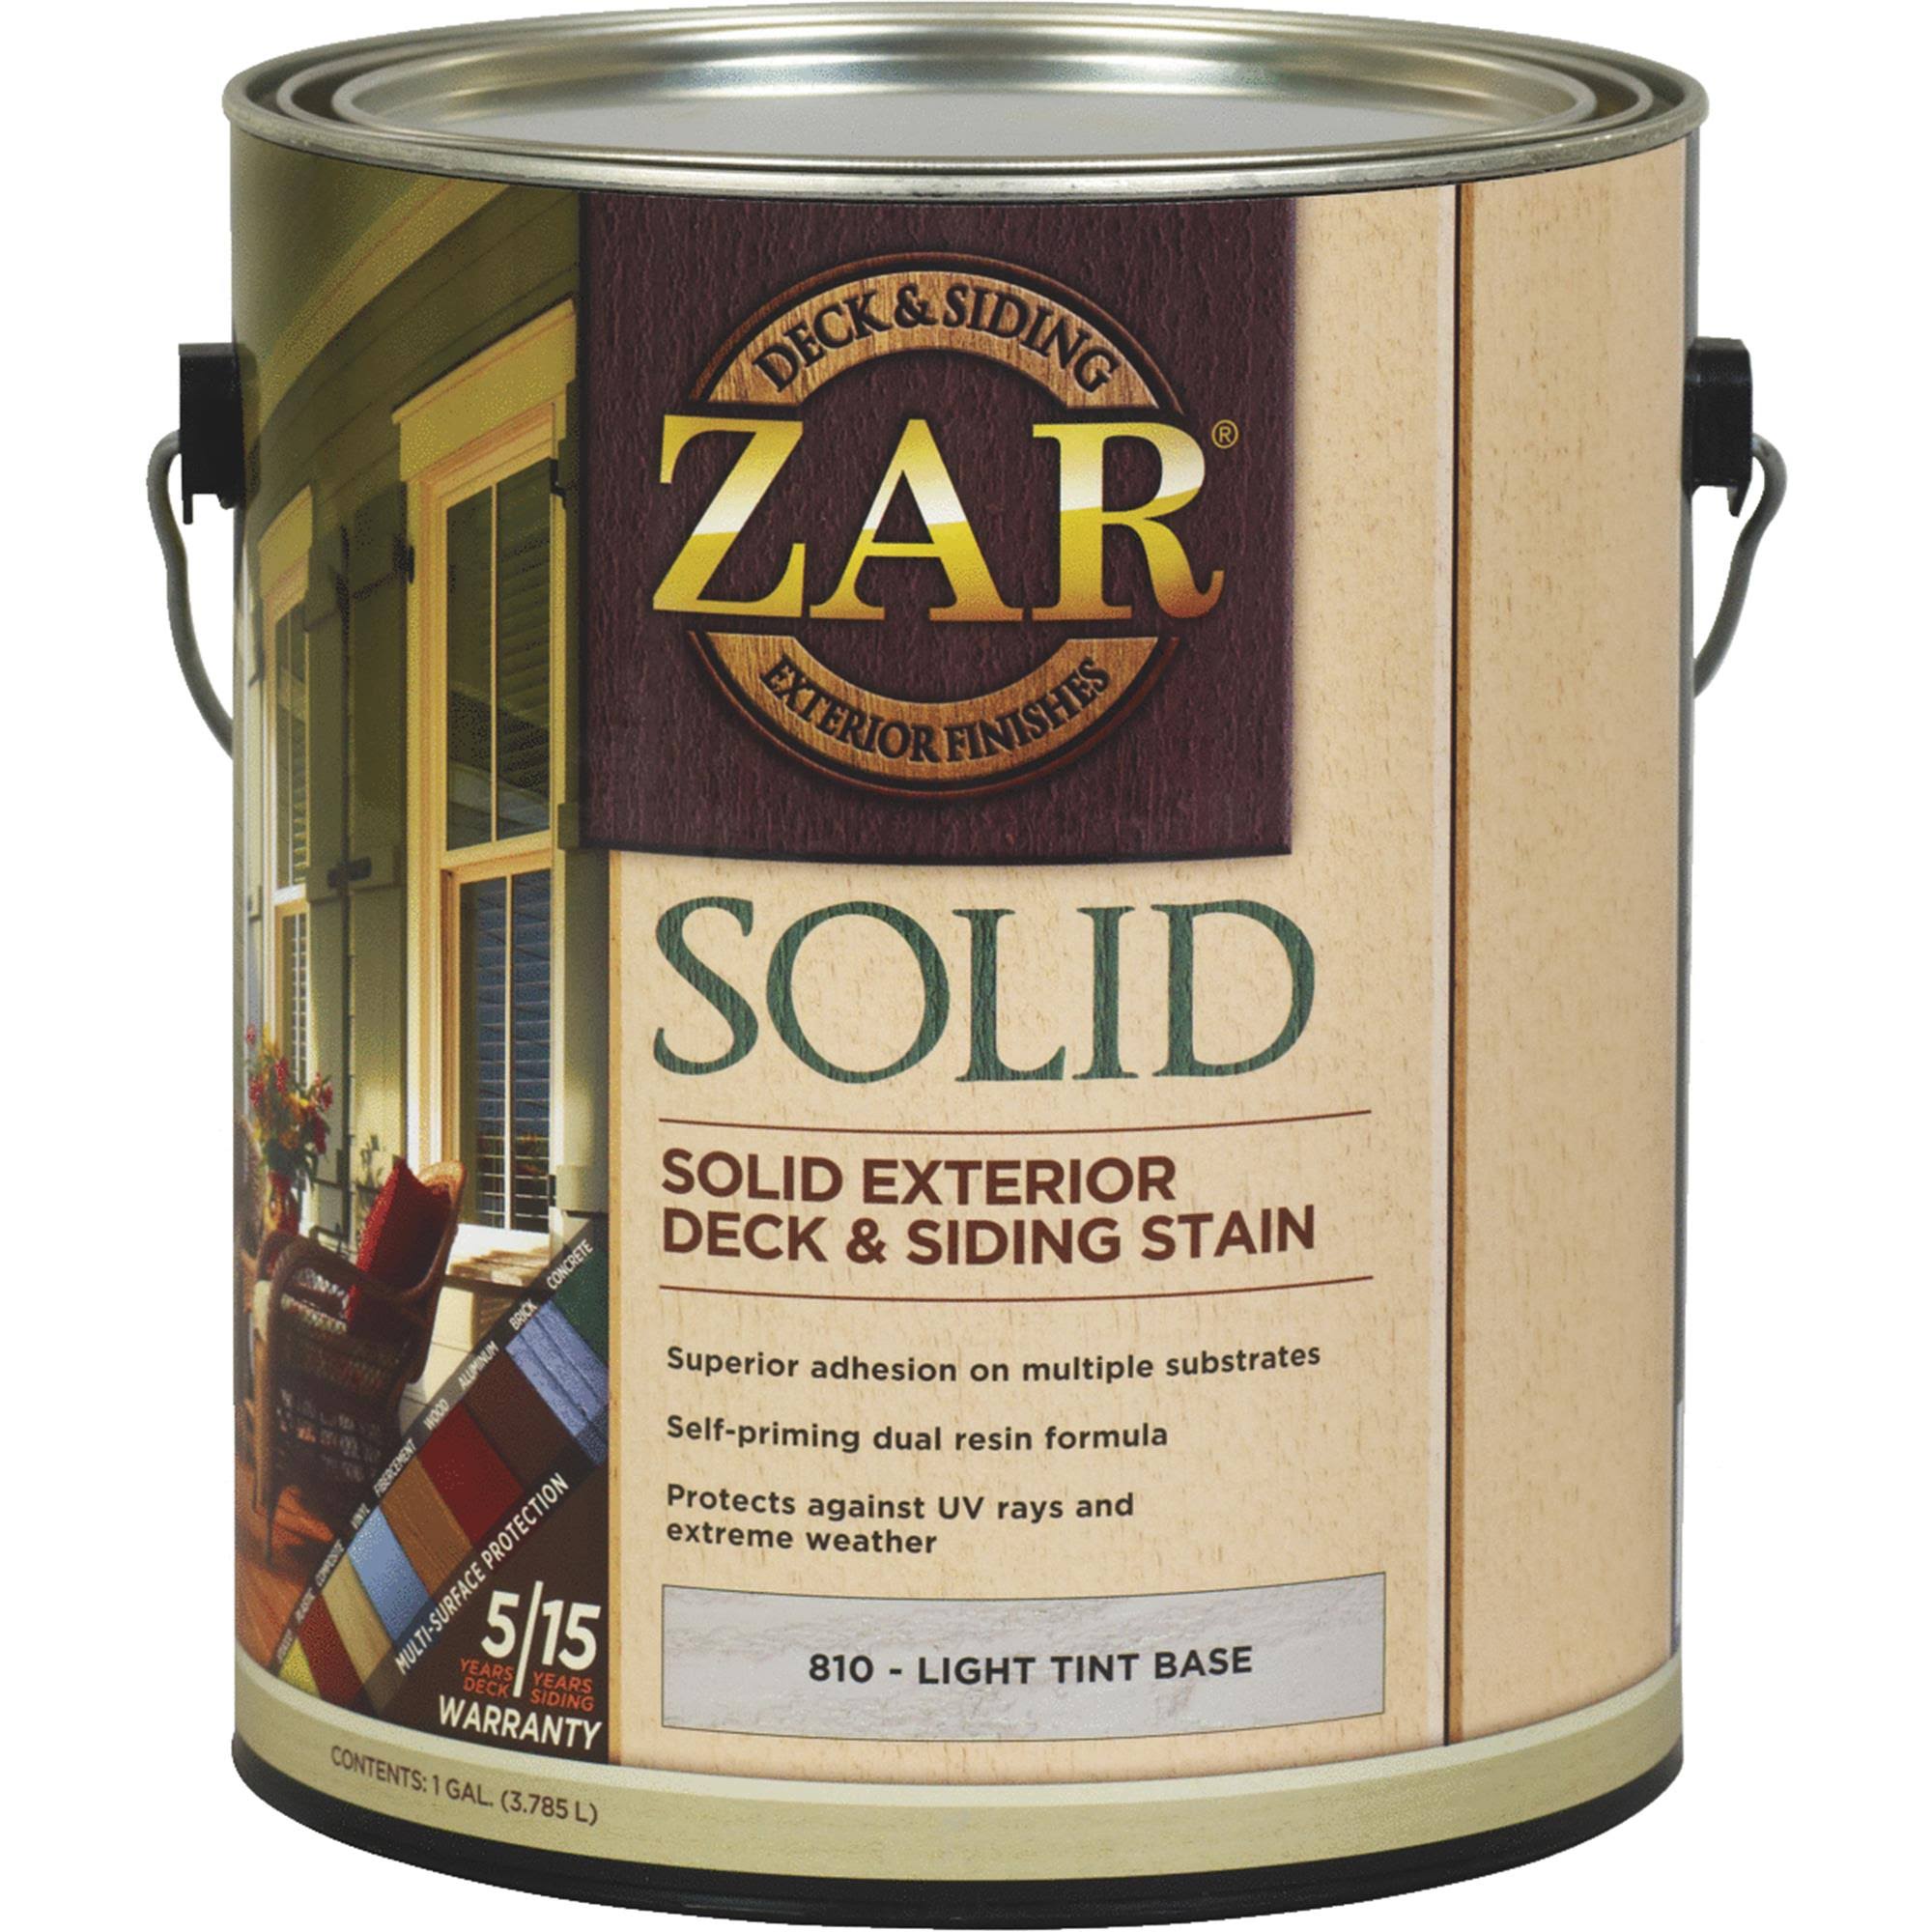 81013 Zar Solid Exterior Deck & Siding Stain